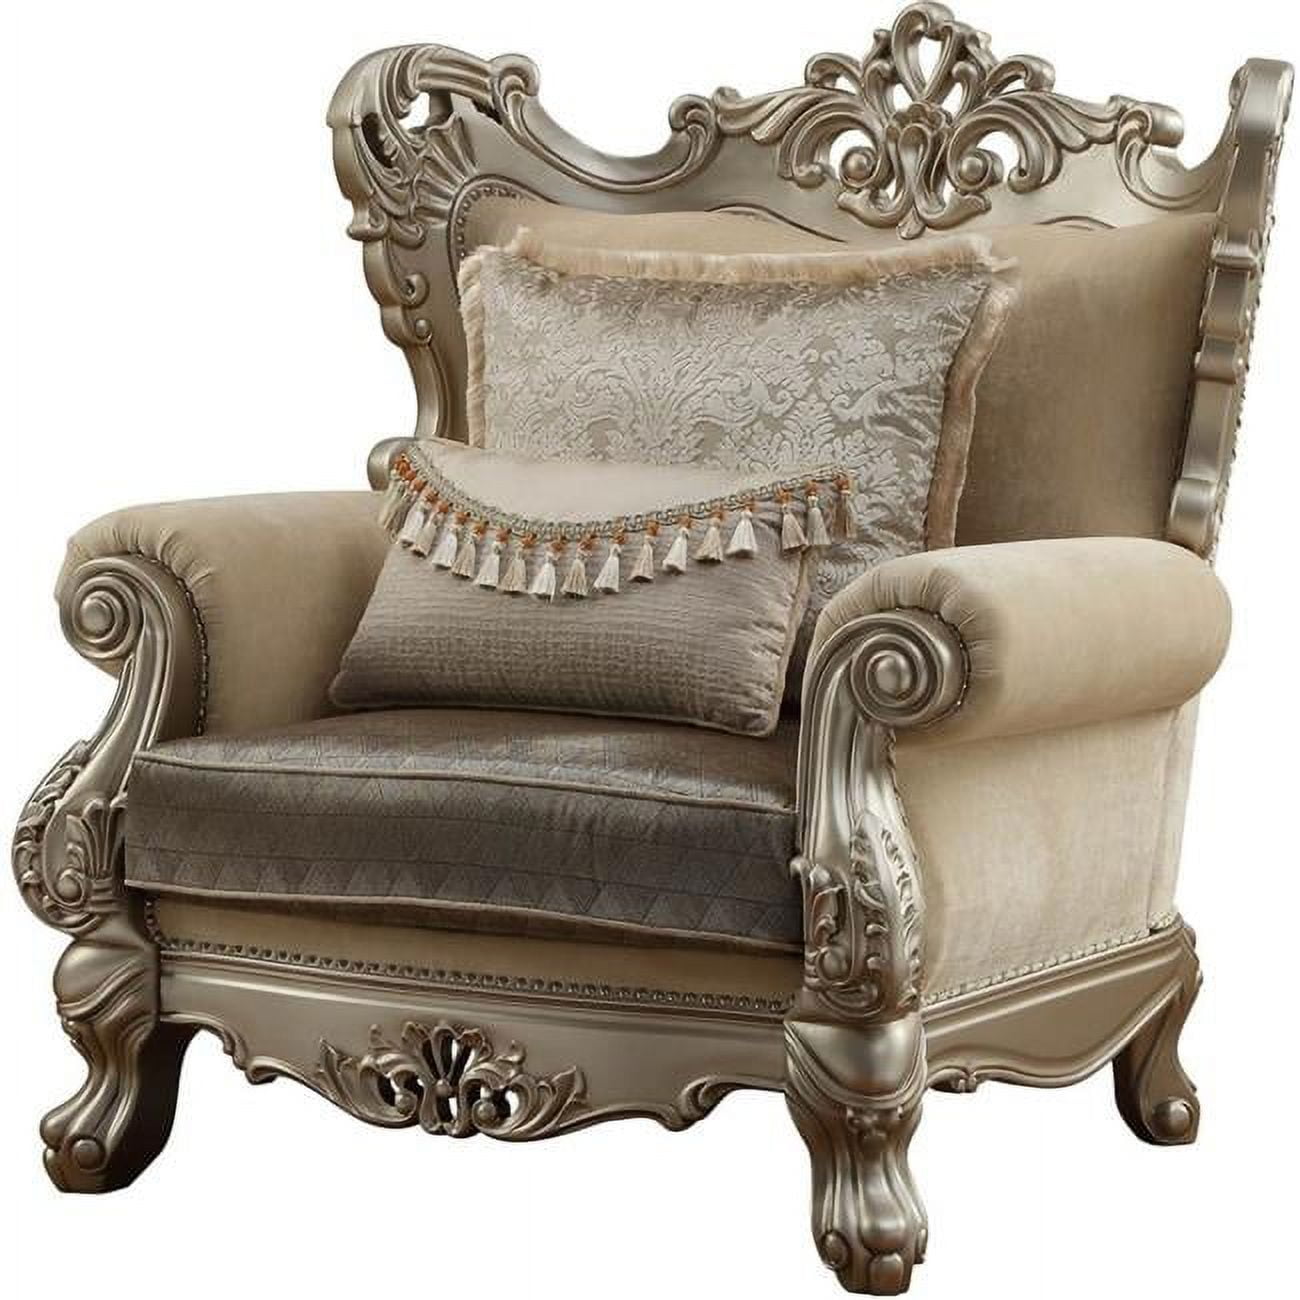 Picture of ACME 51042 2 Piece Ranita Chair with 2 Pillows - Fabric & Champagne